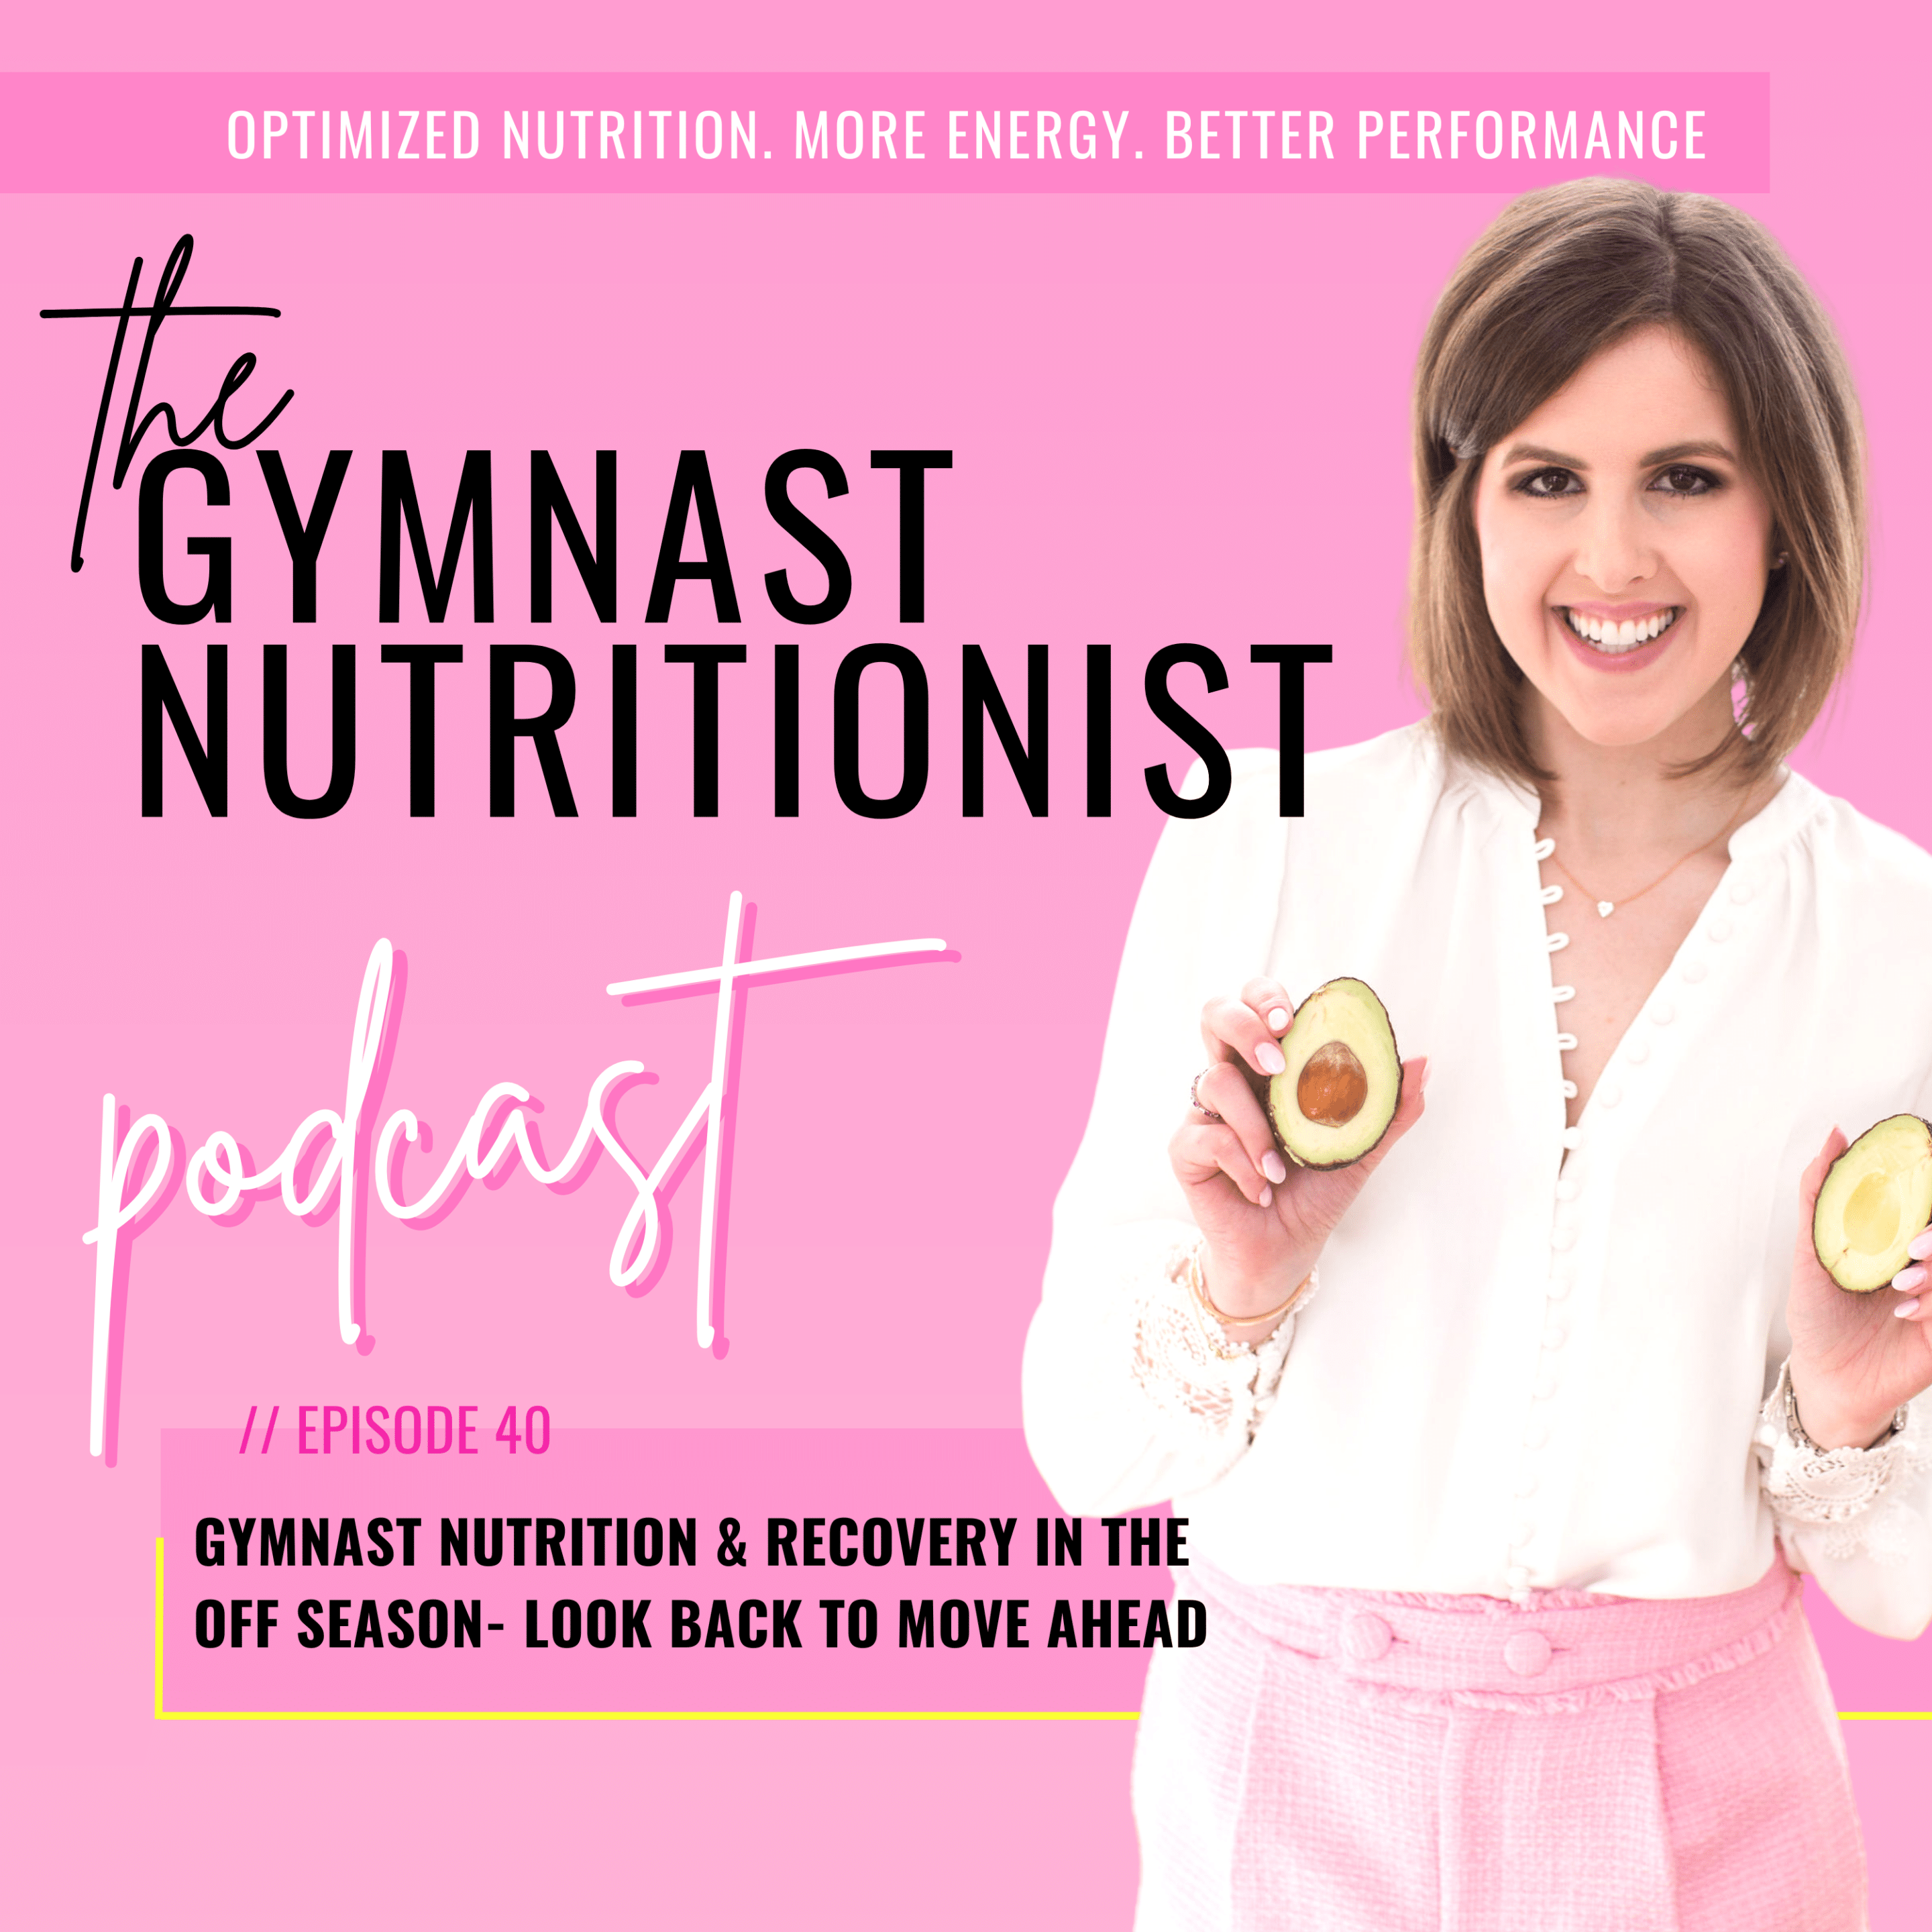 Episode 40: Gymnast Nutrition & Recovery in the Off Season- Look back to move ahead